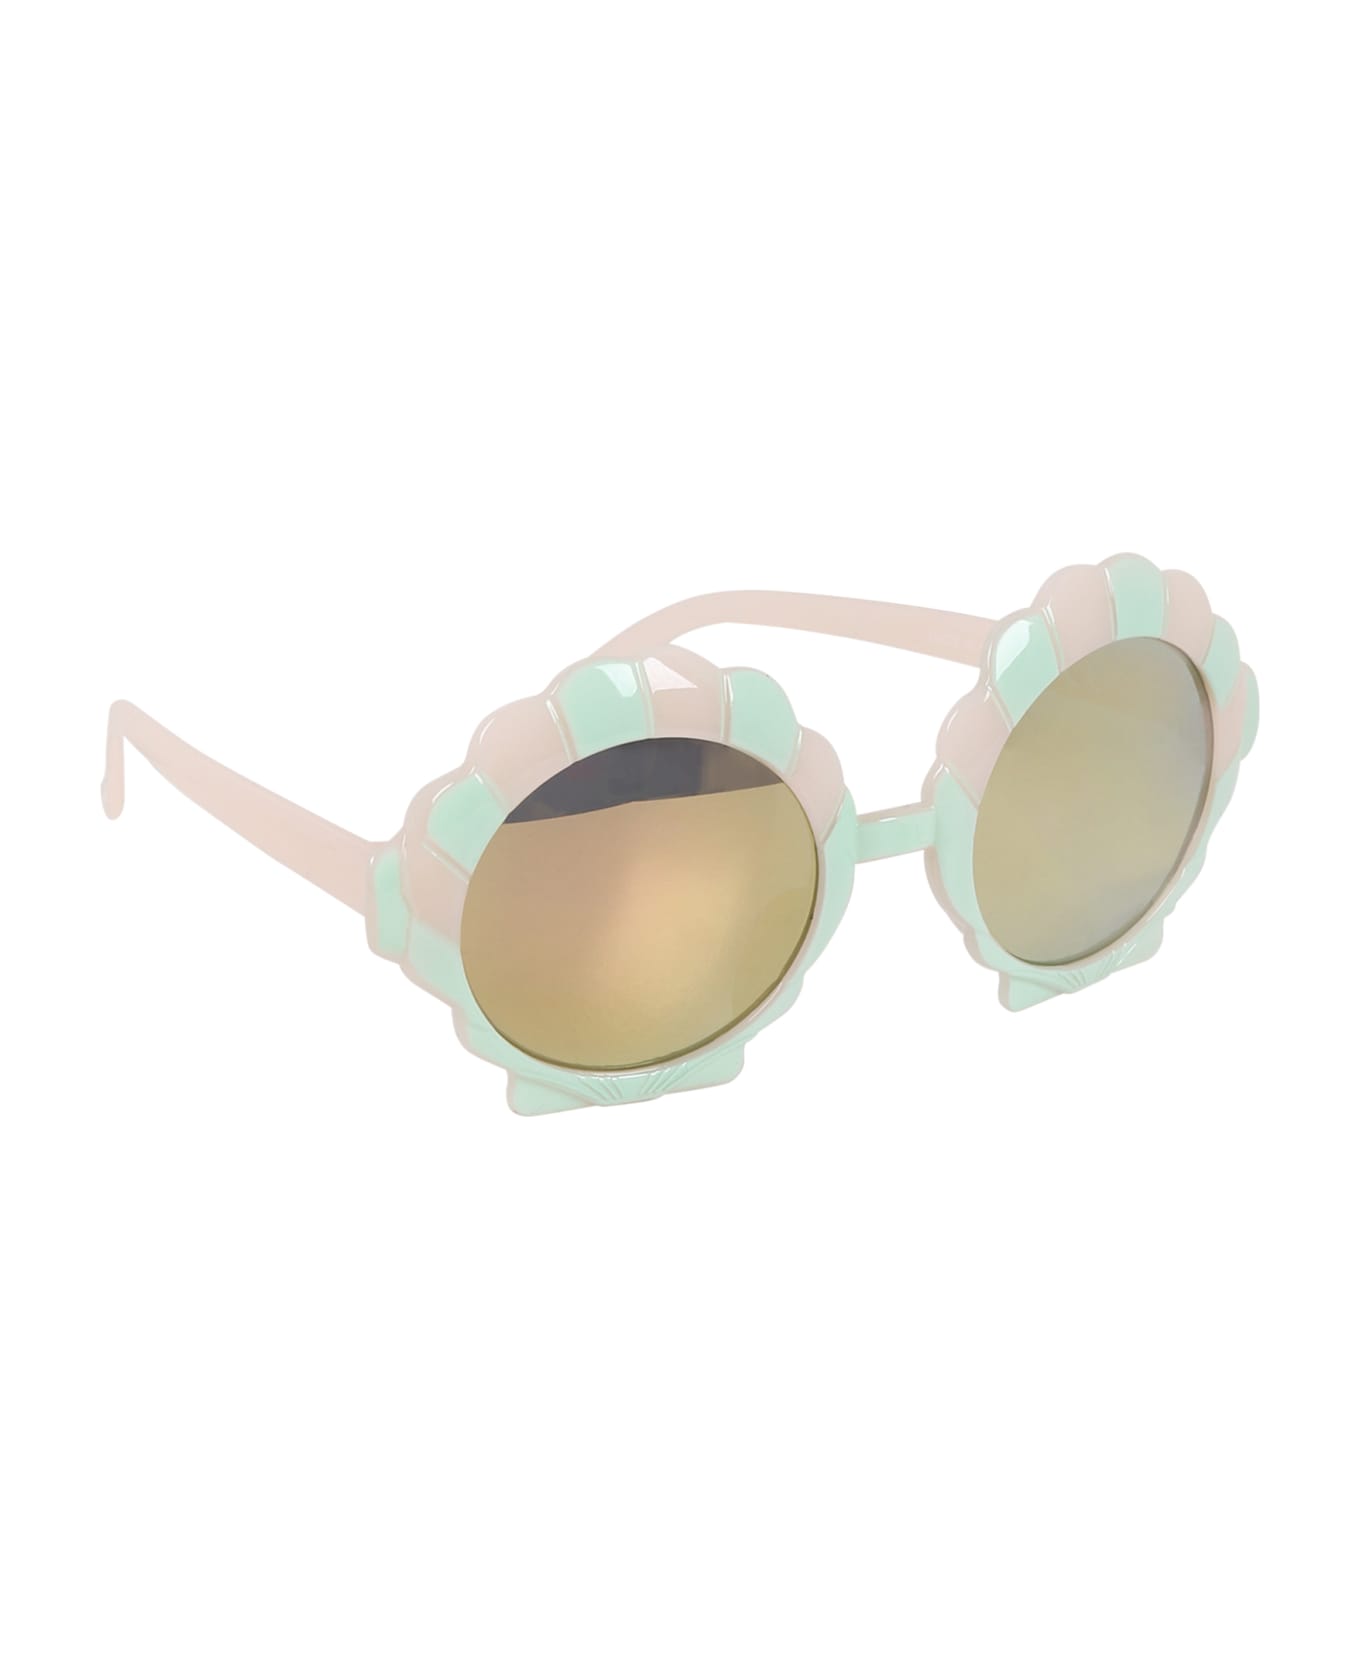 Molo Multicolor Silly Sunglasses For Girl - Multicolor アクセサリー＆ギフト